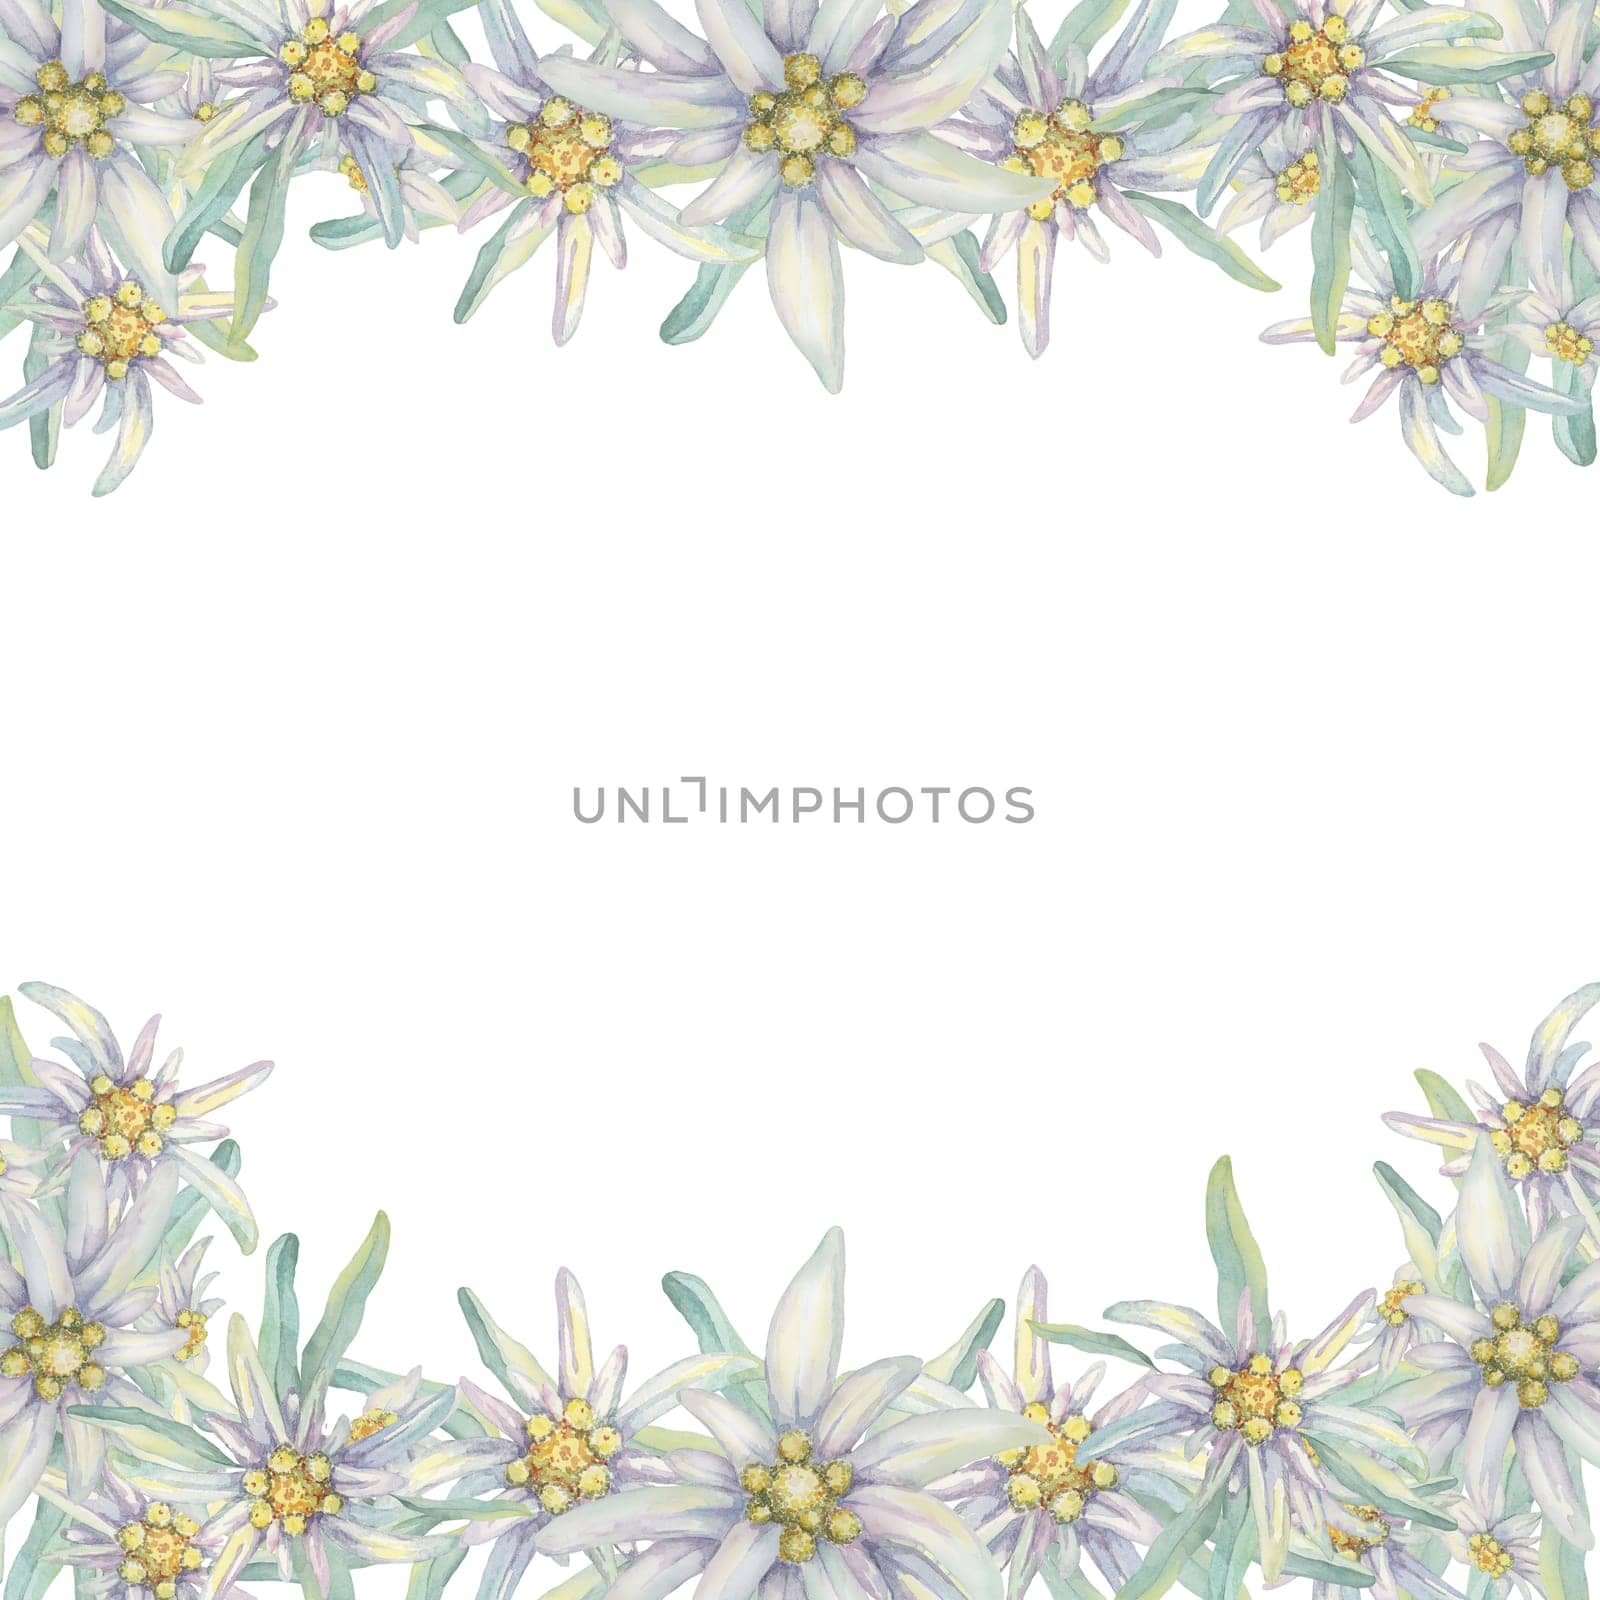 Edelweiss floral template in watercolor by Fofito